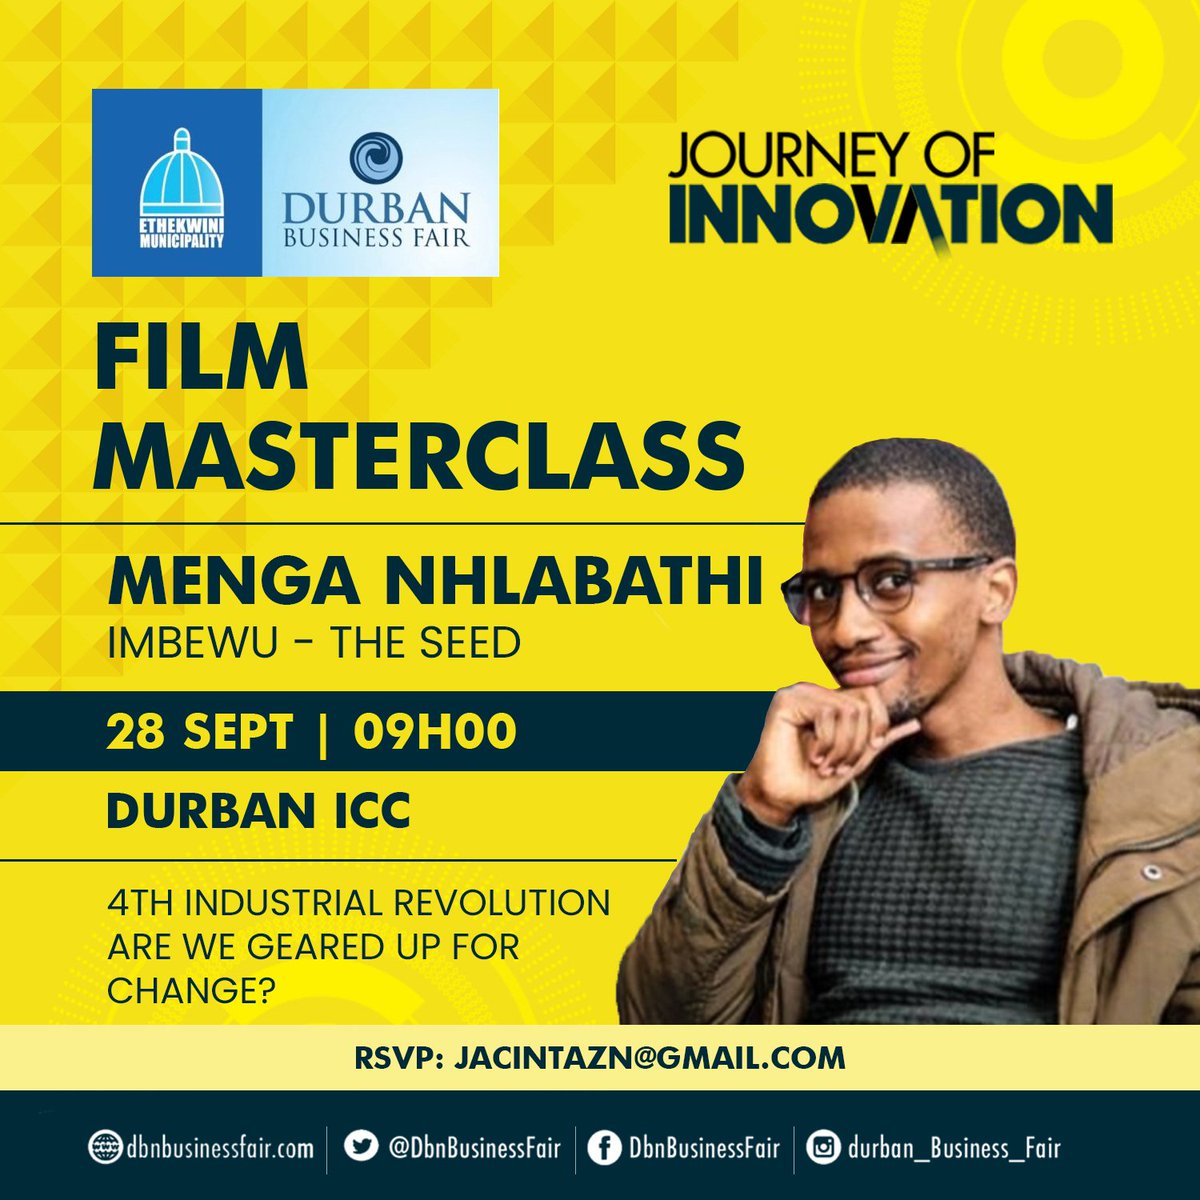 Join me and other film makers at the @DBNBusinessFair #DBF21 as we talk innovation and #4IR